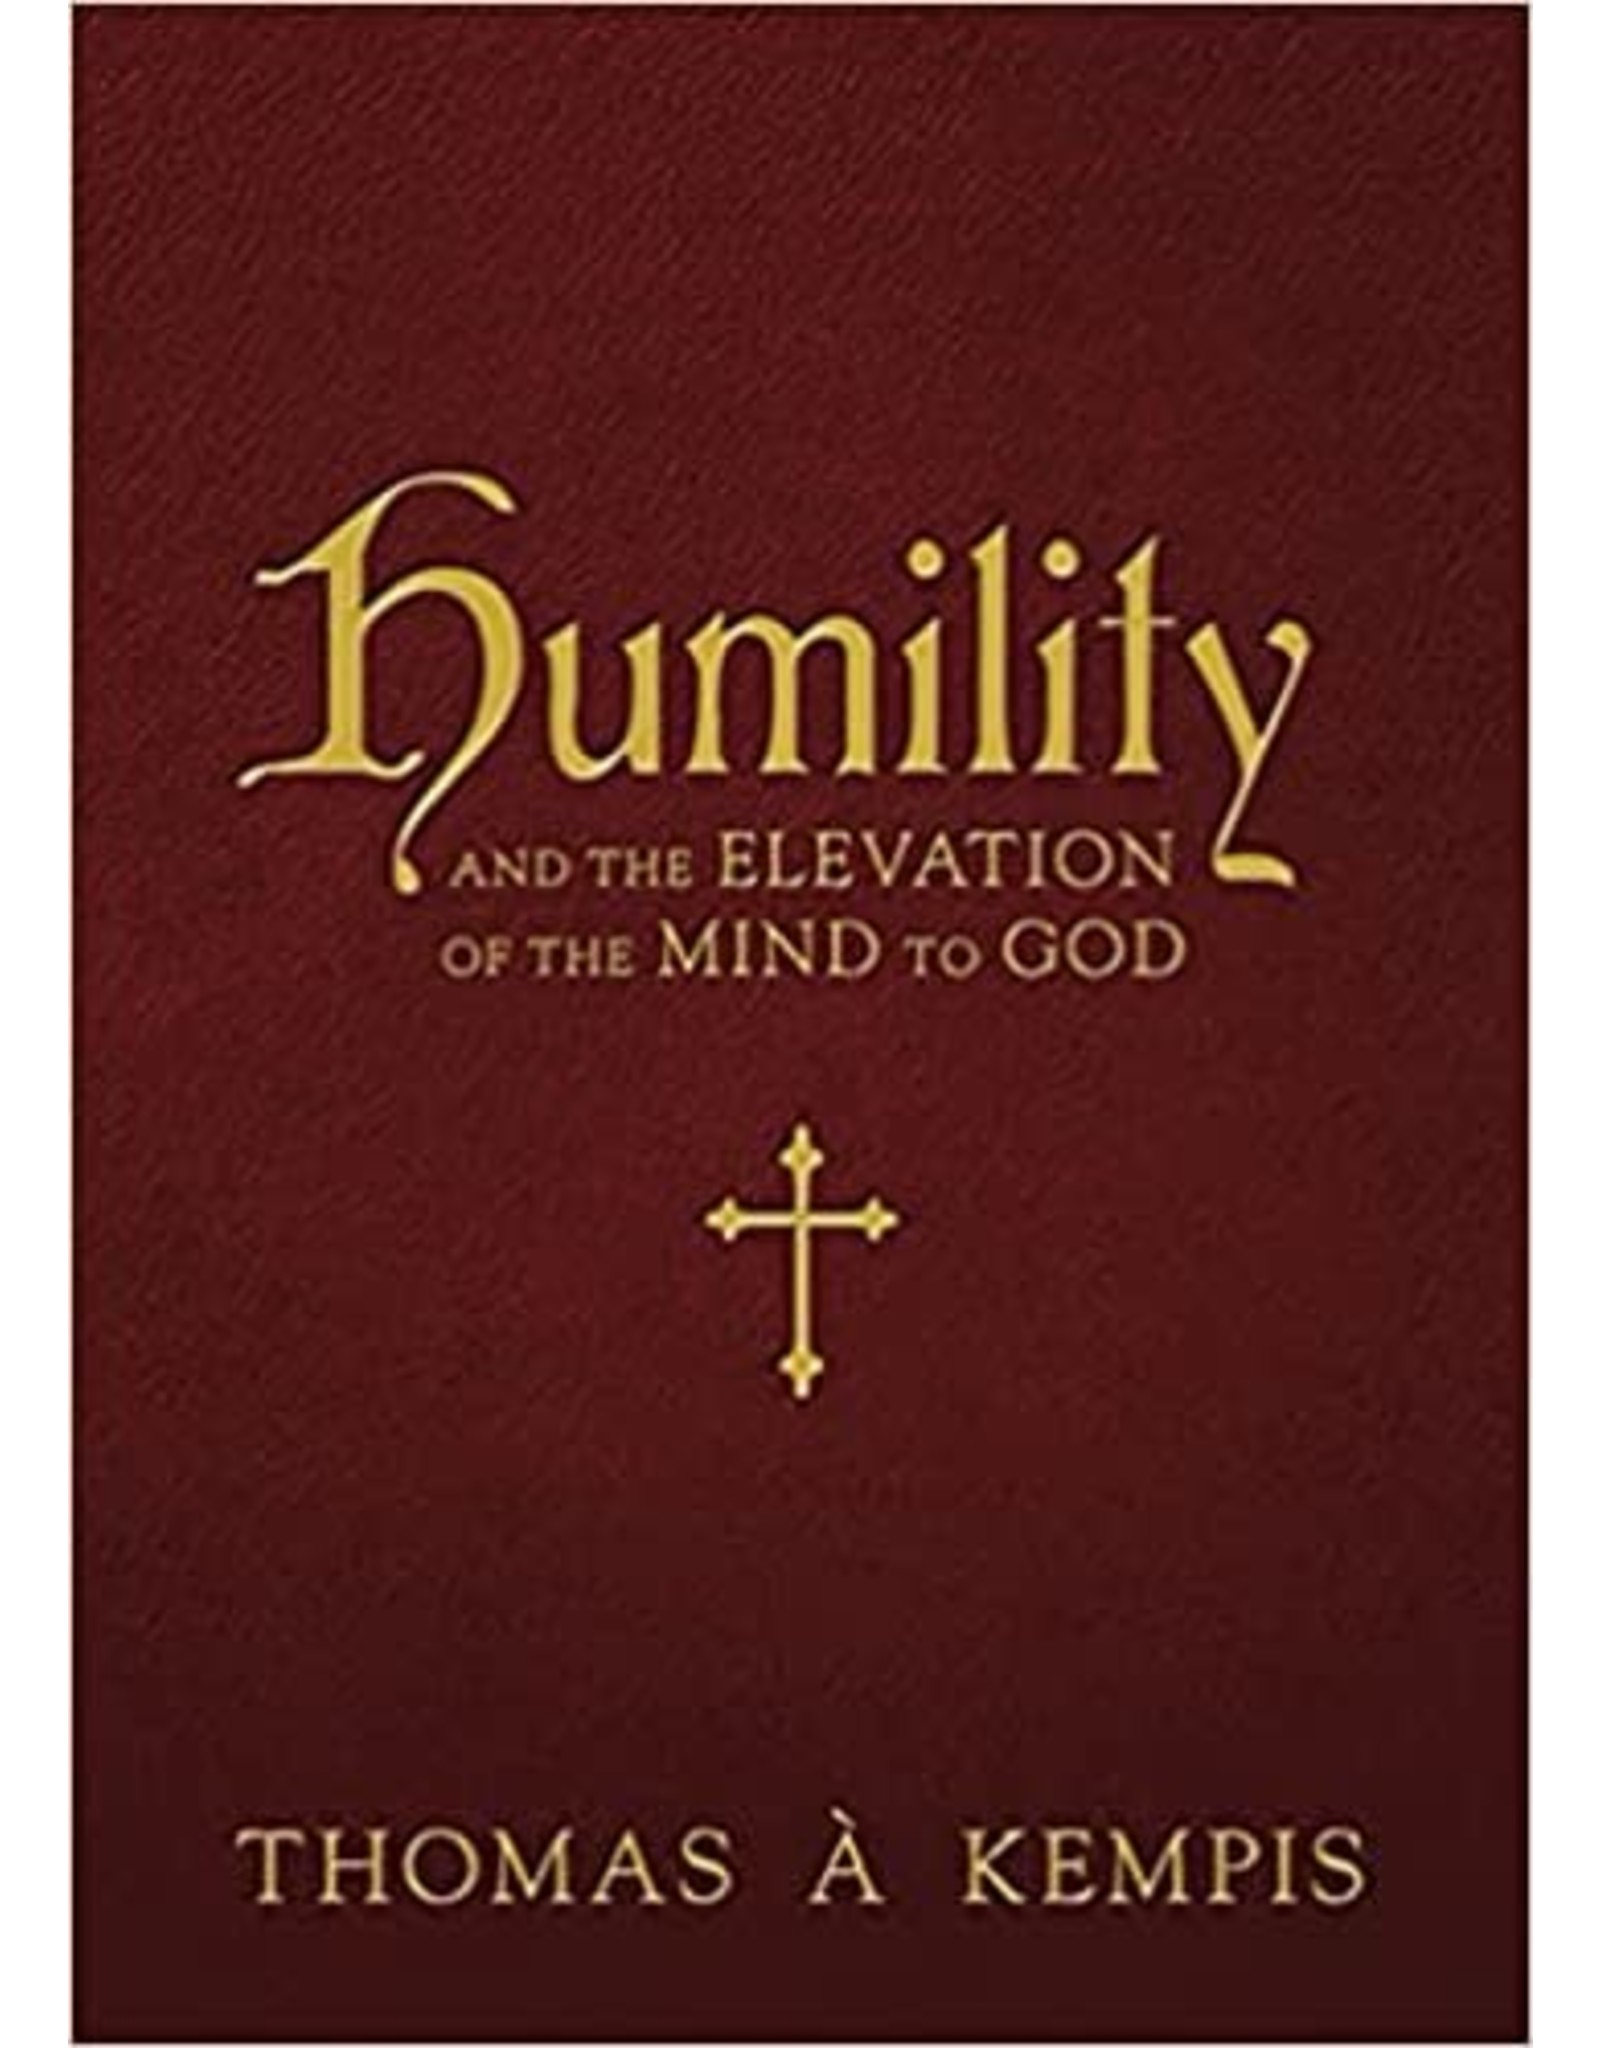 Humility & the Elevation of the Mind to God